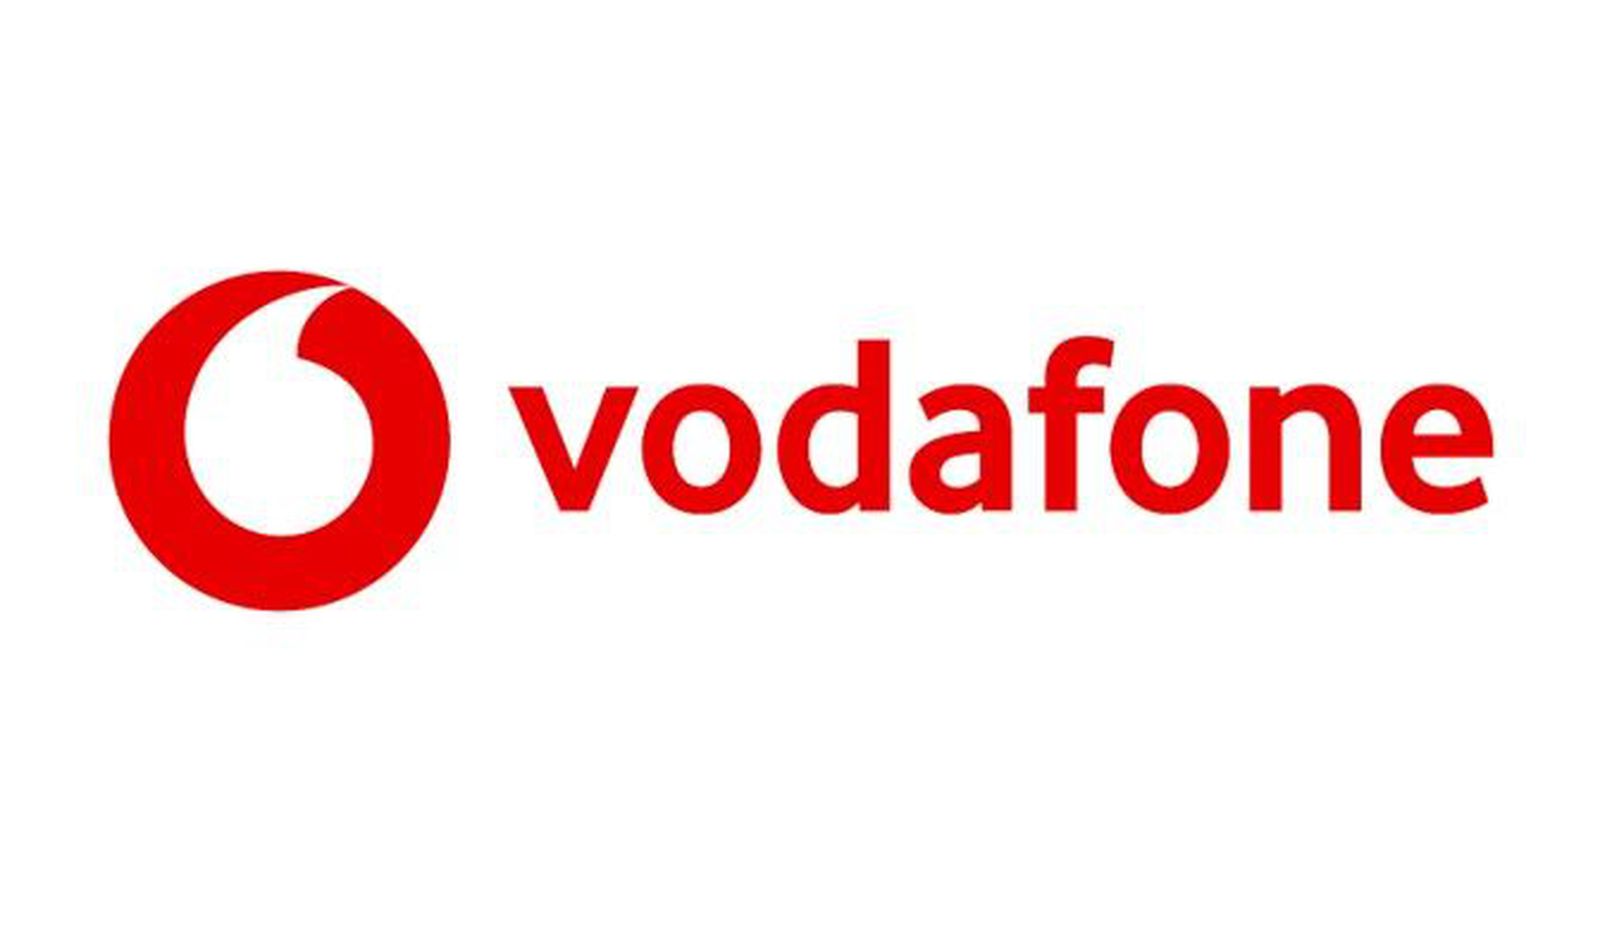 Vodafone to Bring Back EU Roaming Charges for UK Customers Abroad